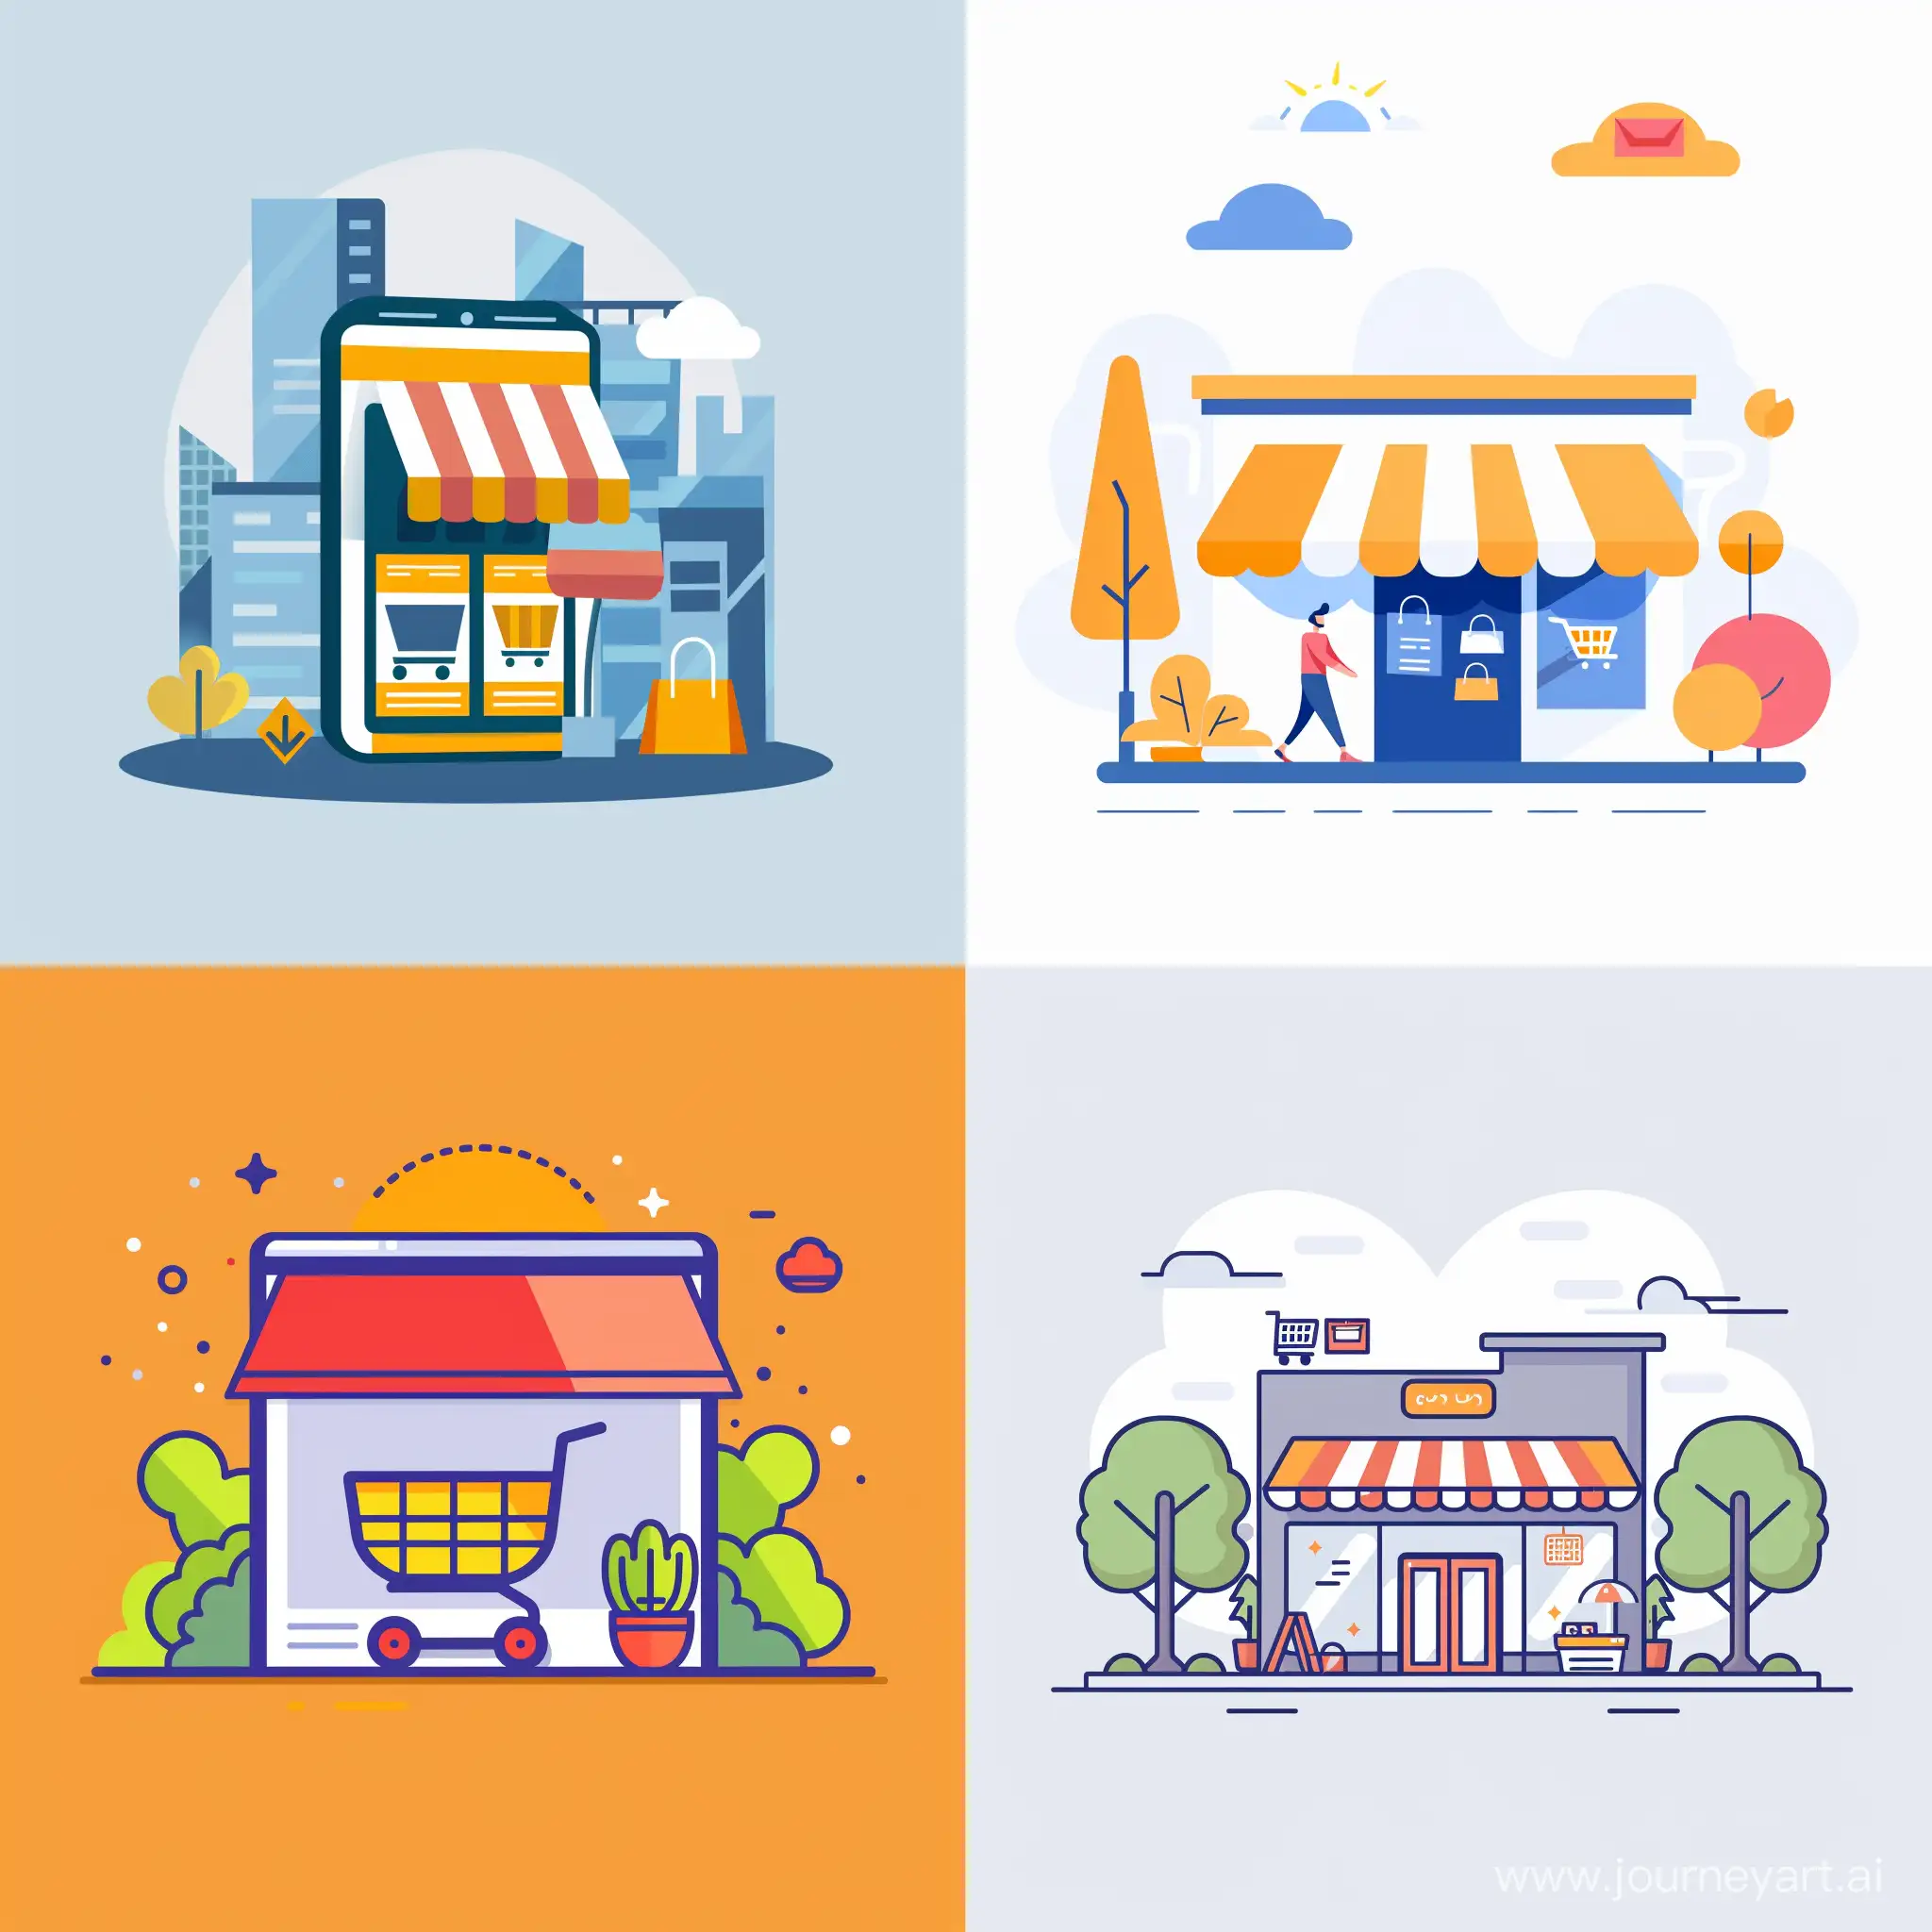 illustration a minimal graphic image about "How to build ecommerce website in Qazvin city in Iran" with a plain color background

